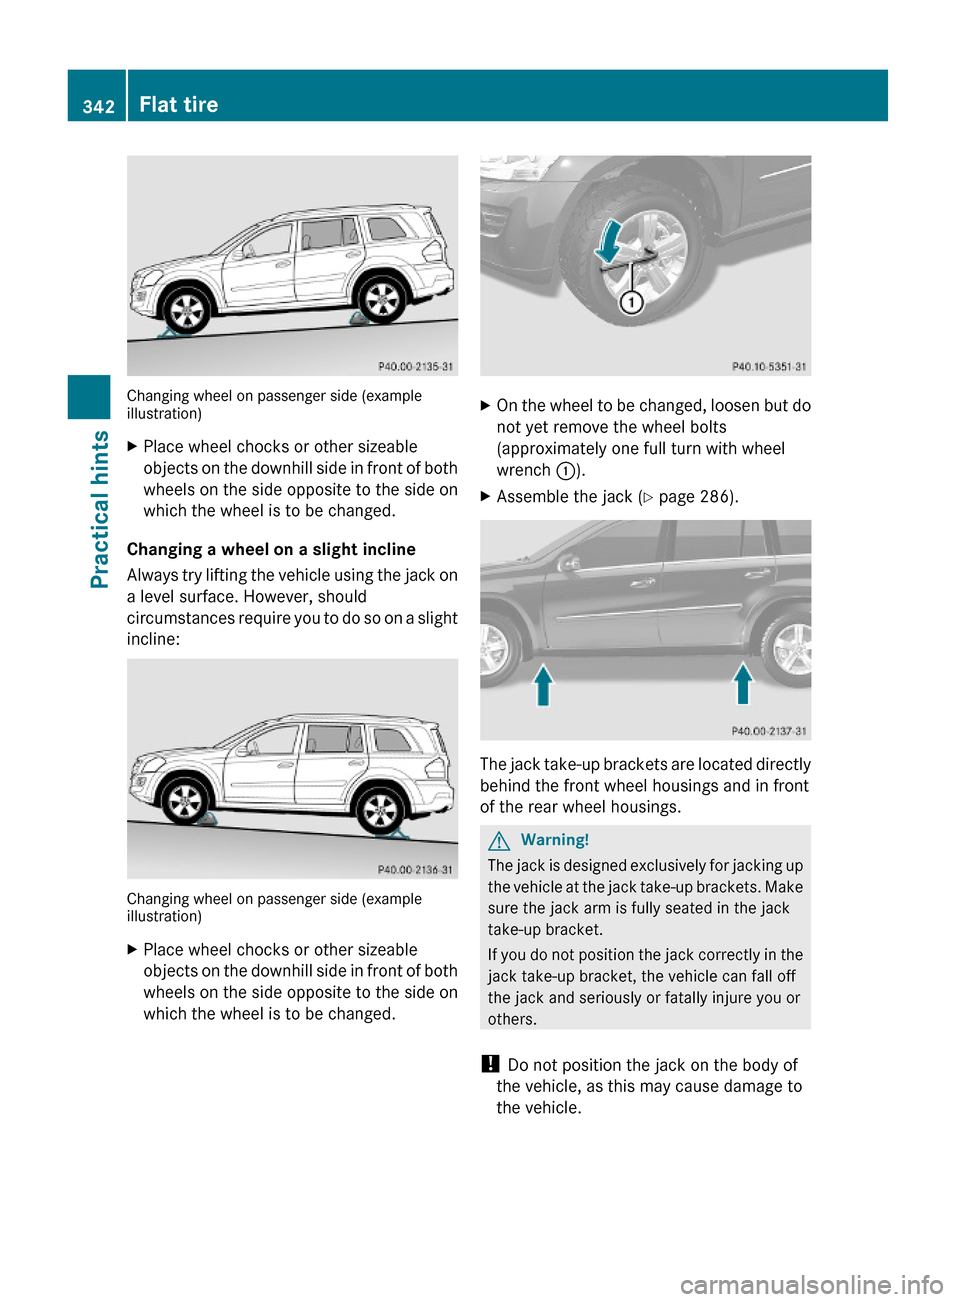 MERCEDES-BENZ GL450 2010 X164 Owners Manual Changing wheel on passenger side (exampleillustration)
XPlace wheel chocks or other sizeable
objects on the downhill side in front of both
wheels on the side opposite to the side on
which the wheel is